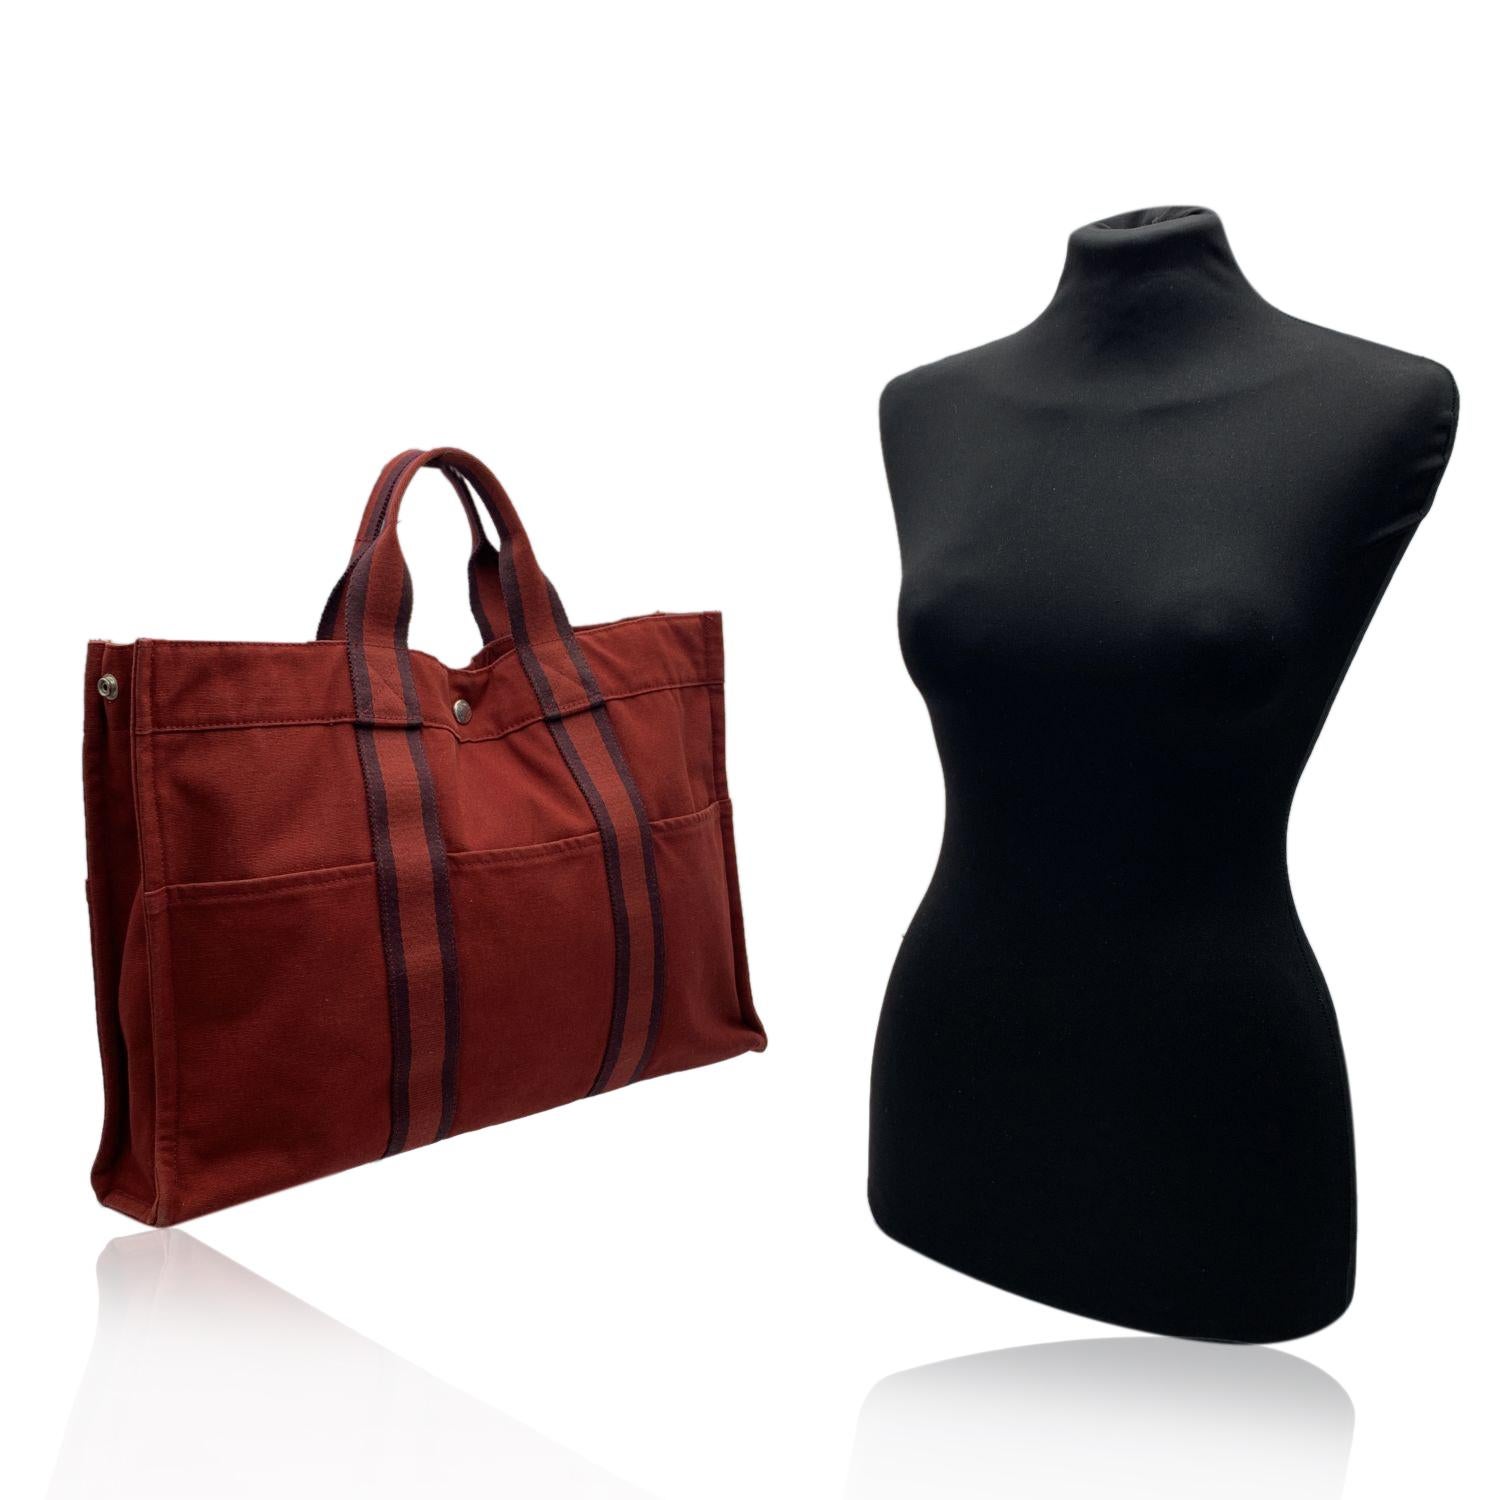 'HERMES FOURRE TOUT - MM' - Tote handbag. Made in France. Brown/burgundy color with red stripes. Material: 100% cotton. It has snaps on both ends for expansion. Durable canvas handles, perfect for casual and everyday use. Open top with middle snap